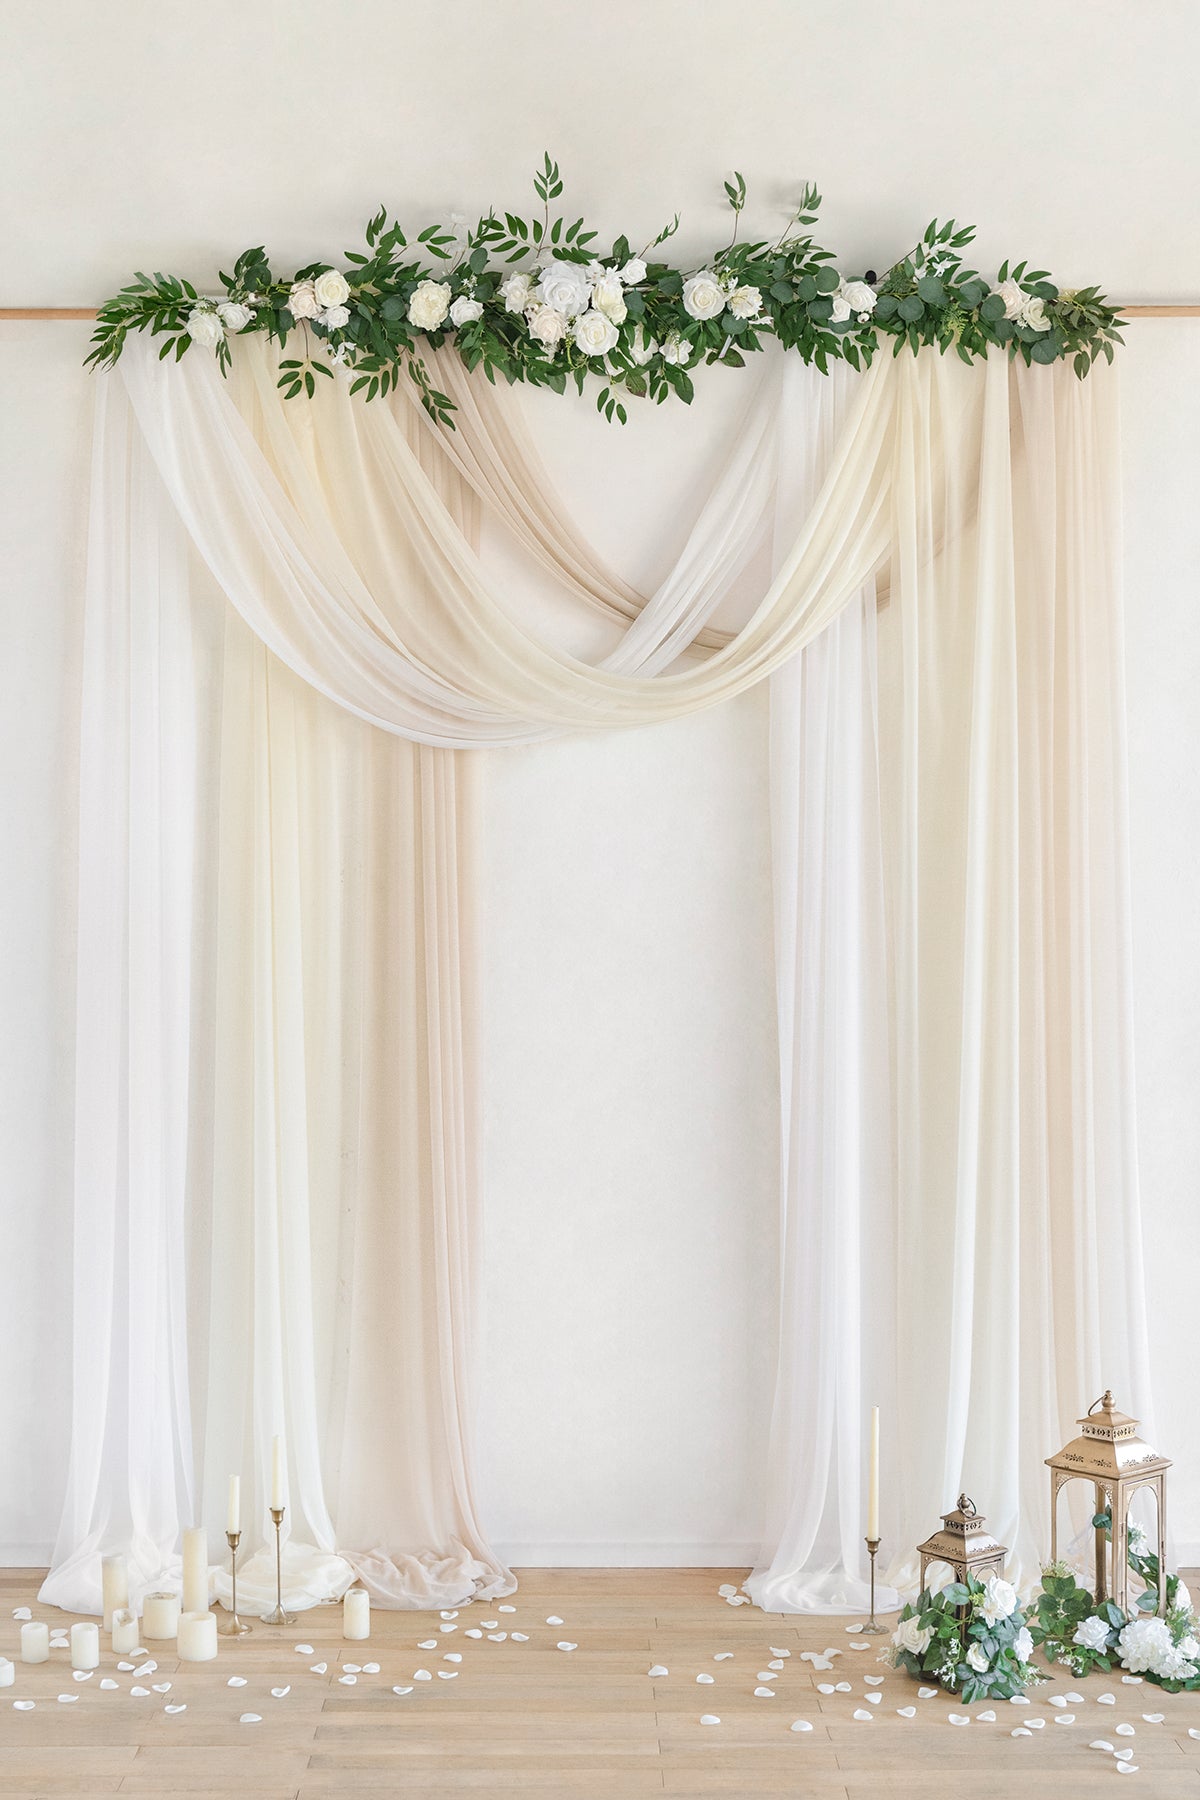 How to Drape Fabric on a Bridal Arch